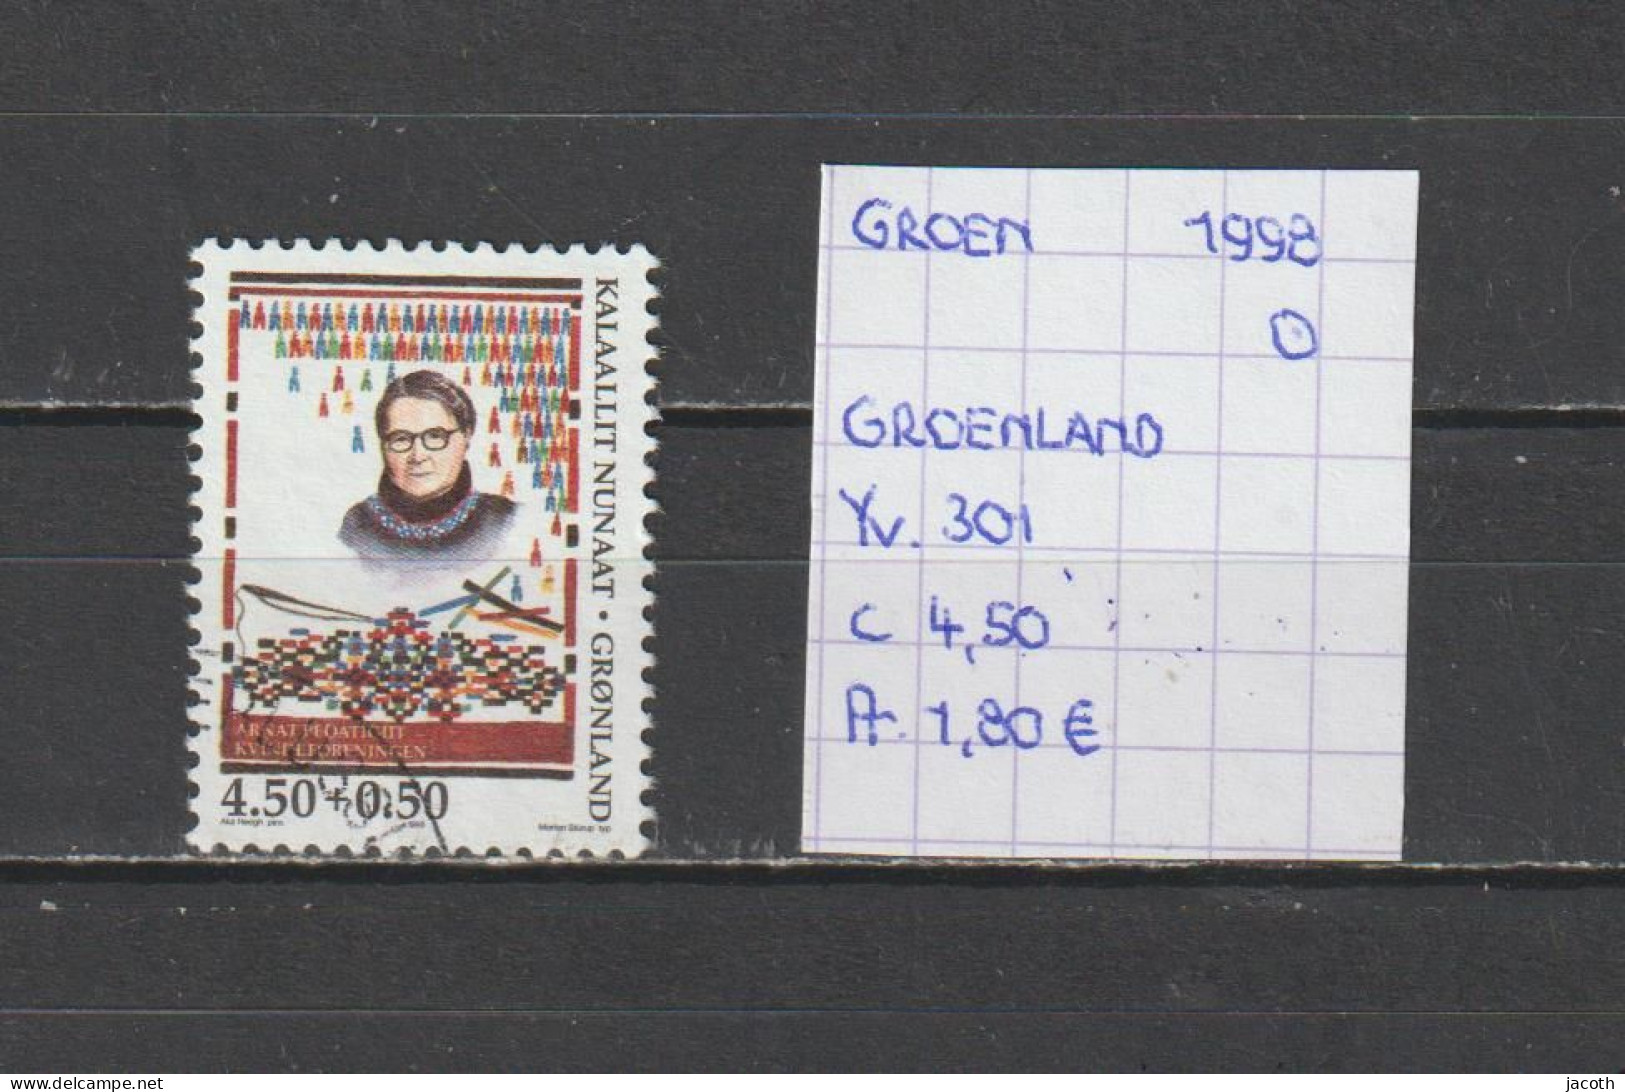 (TJ) Groenland 1998 - YT 301 (gest./obl./used) - Used Stamps